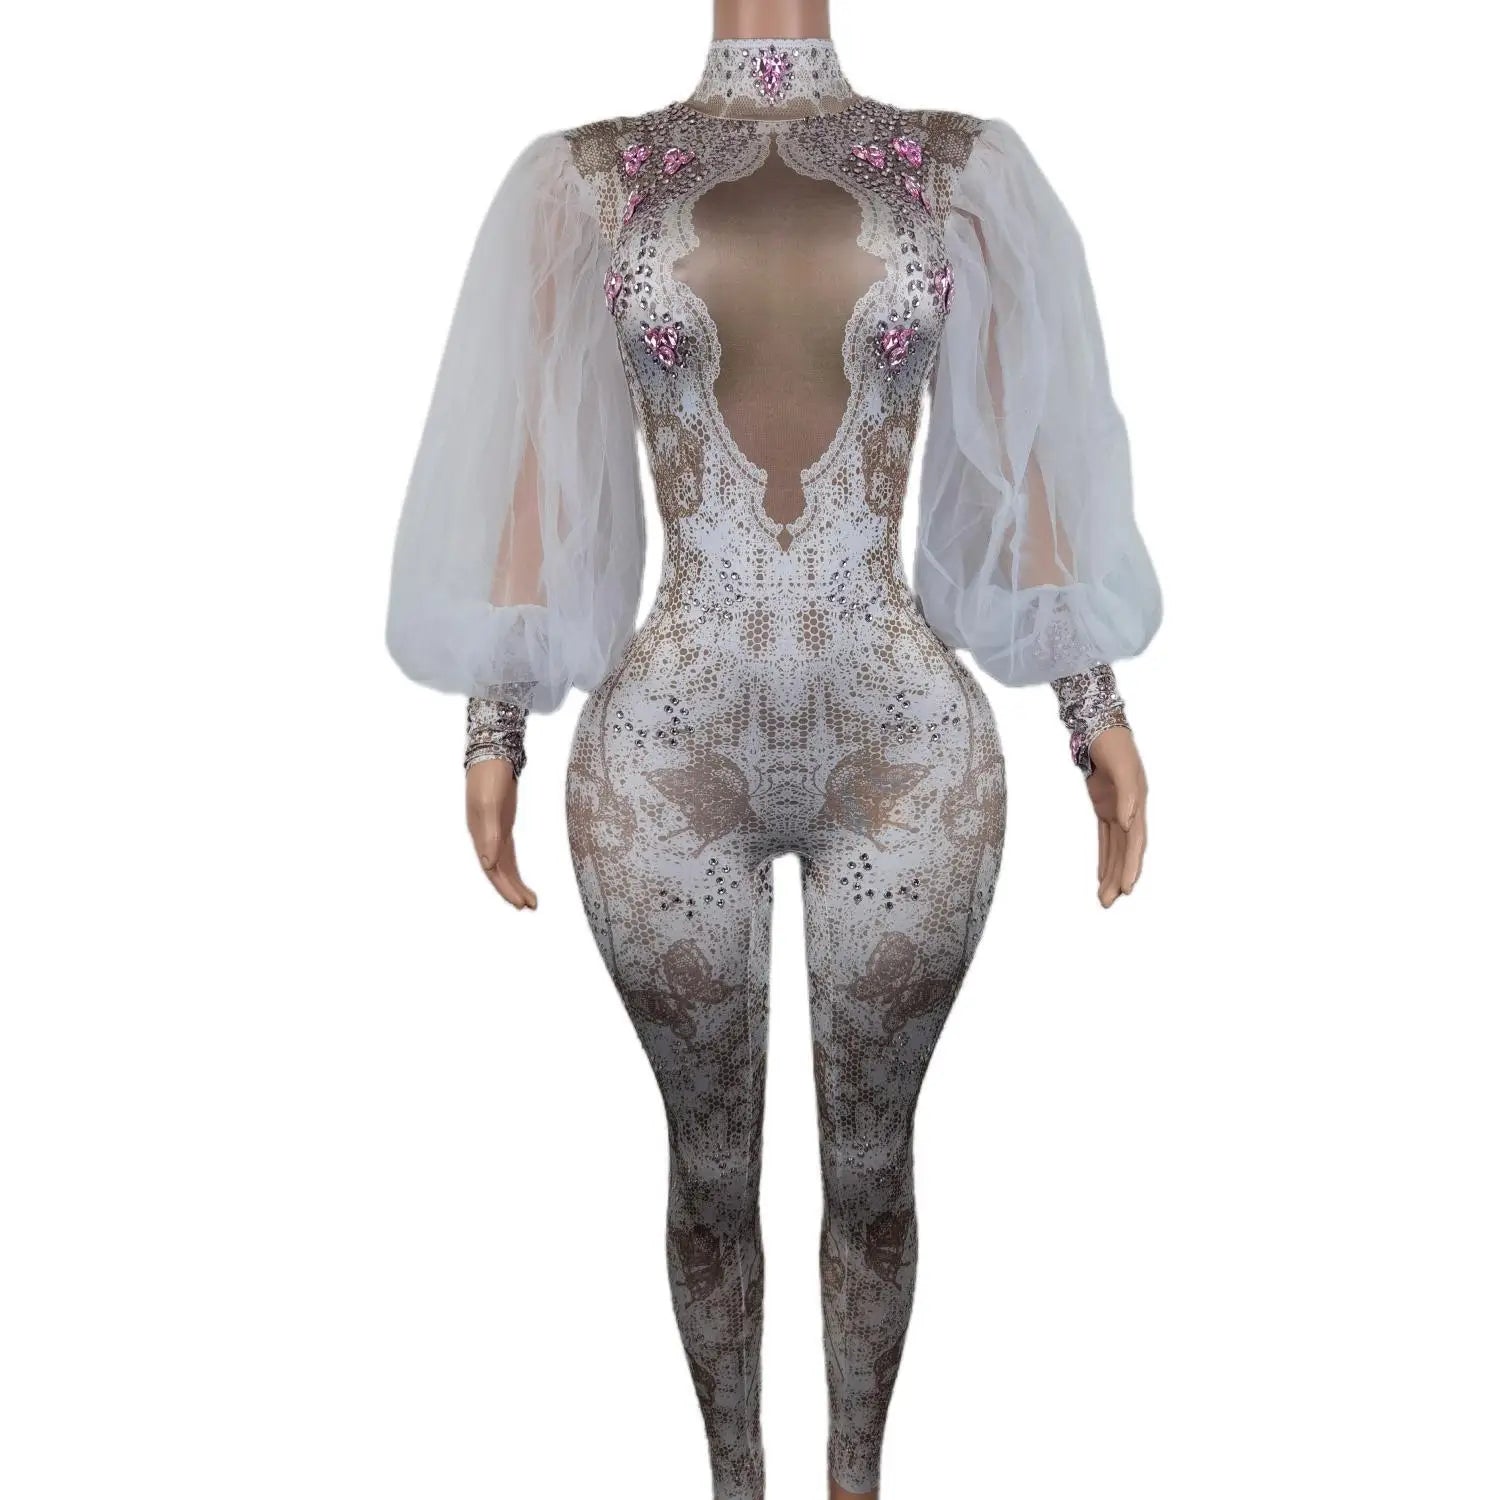 Shining Rhinestones Sexy Long Gauze Folds Sleeves Jumpsuits Women Carnival Party Club Clothing Stage Perform Costumes